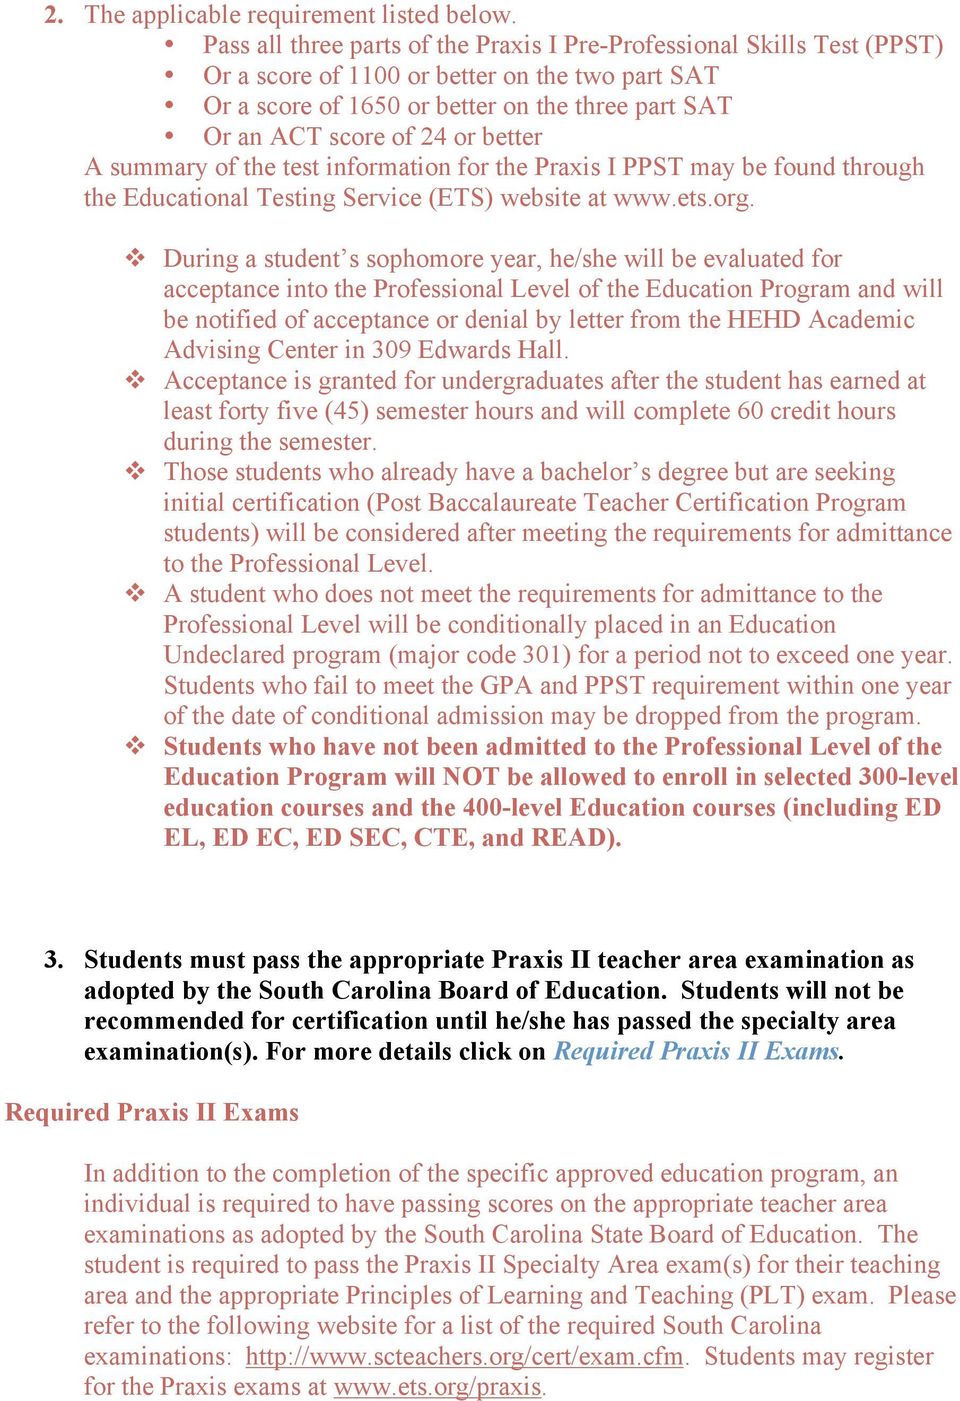 better A summary of the test information for the Praxis I PPST may be found through the Educational Testing Service (ETS) website at www.ets.org.